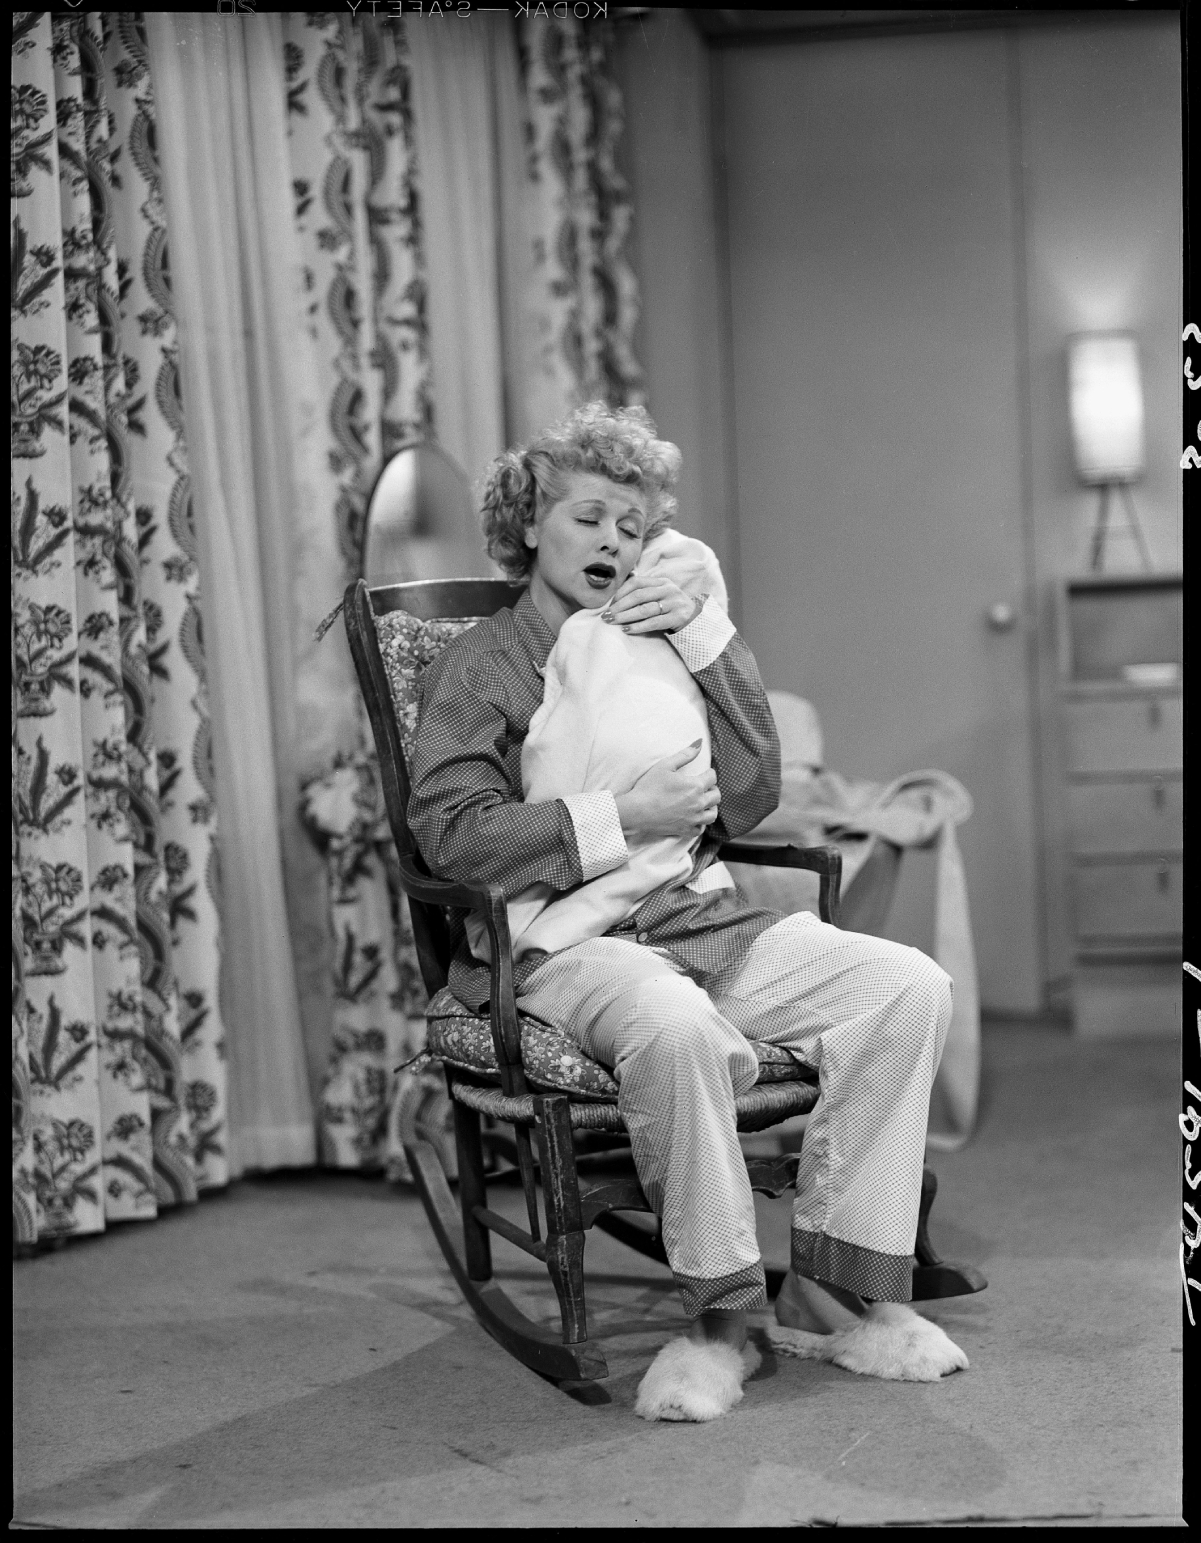 Lucille Ball in a scene from 'I Love Lucy' with baby Little Ricky